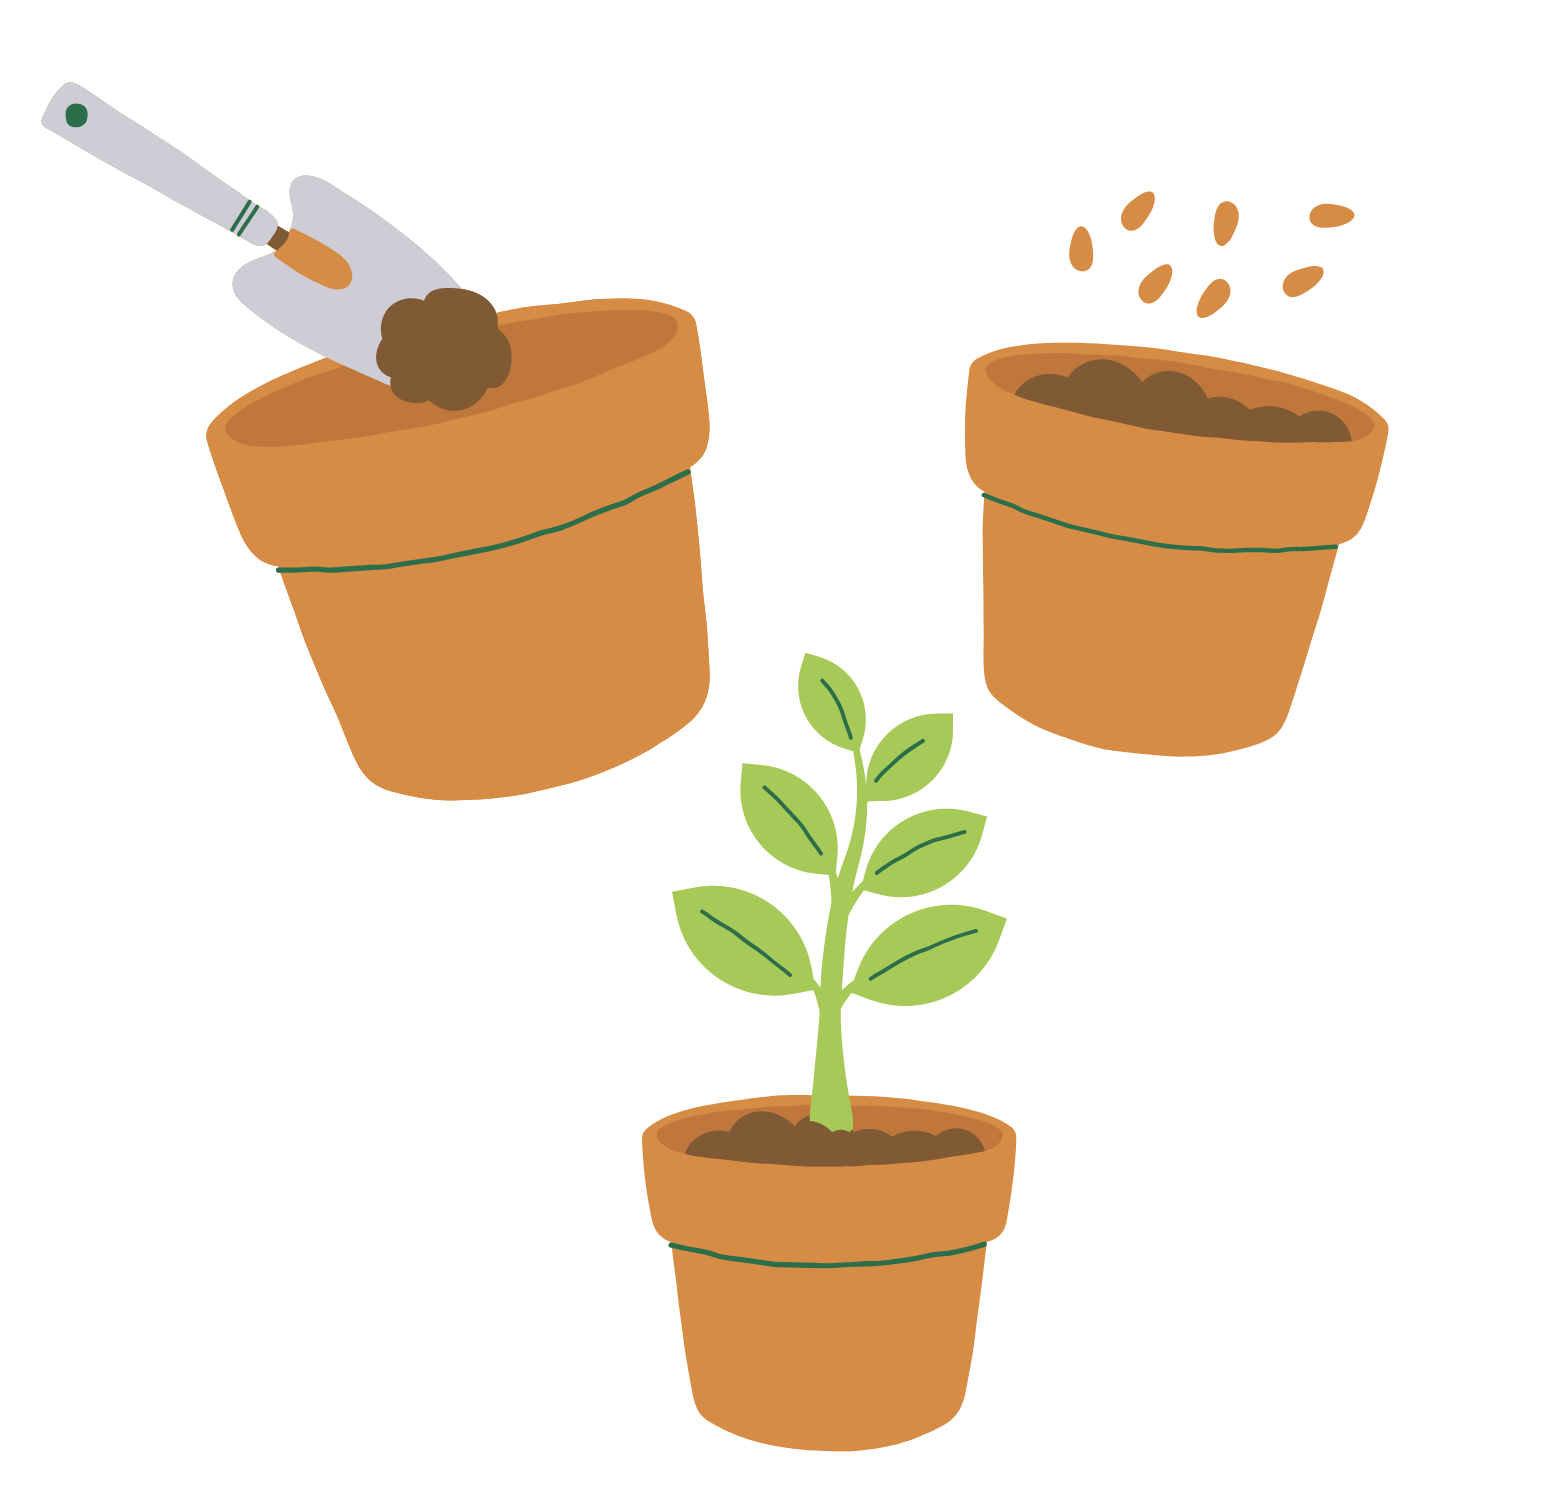 Images depicting a shovel with dirt in an orange clay pot, seeds in an orange clay pot with soil and a green plant growing in an orange clay pot.